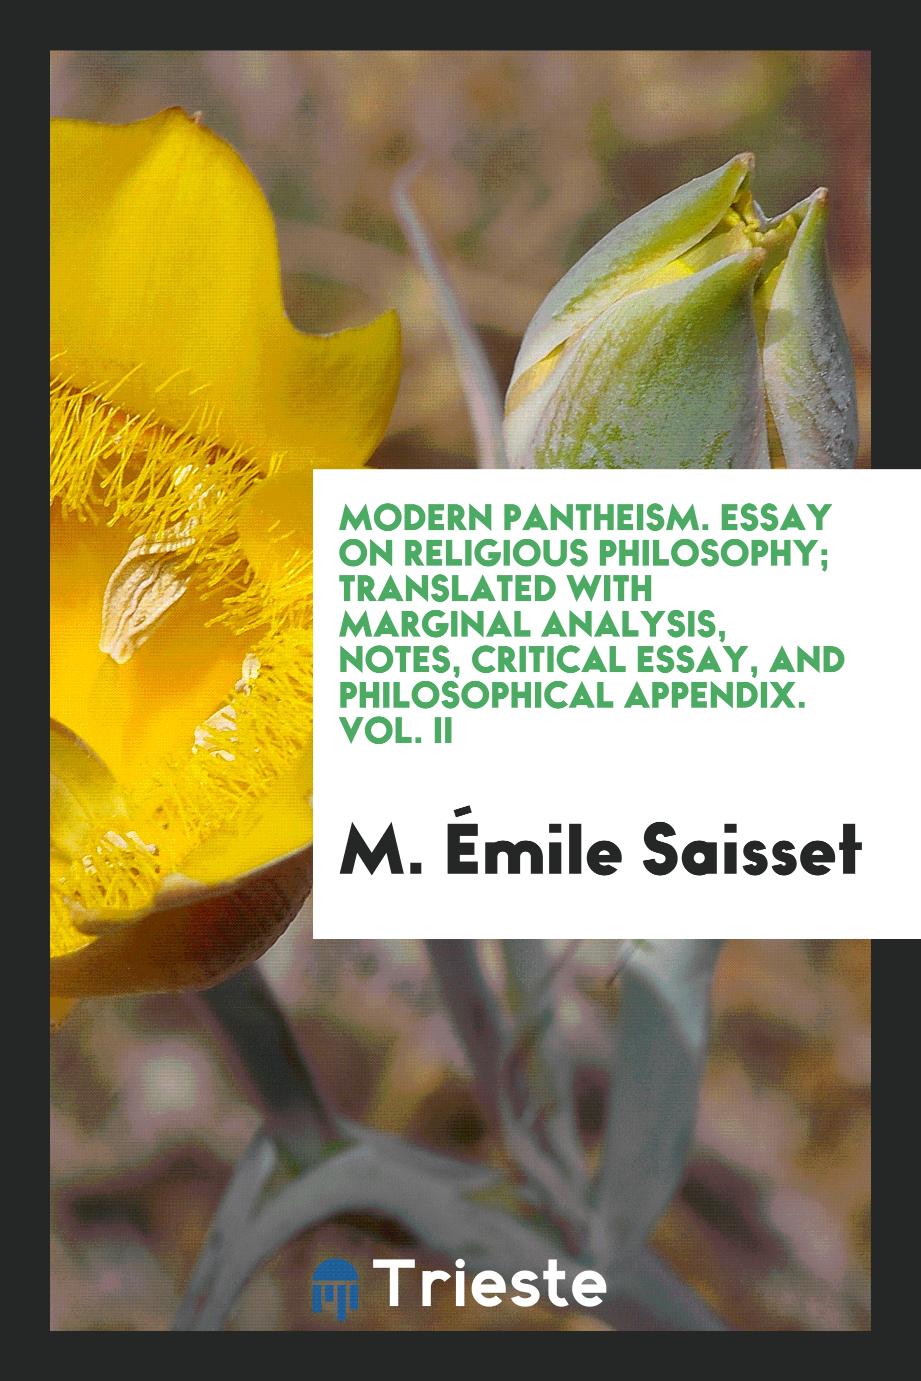 Modern Pantheism. Essay on Religious Philosophy; Translated with Marginal Analysis, Notes, Critical Essay, and Philosophical Appendix. Vol. II